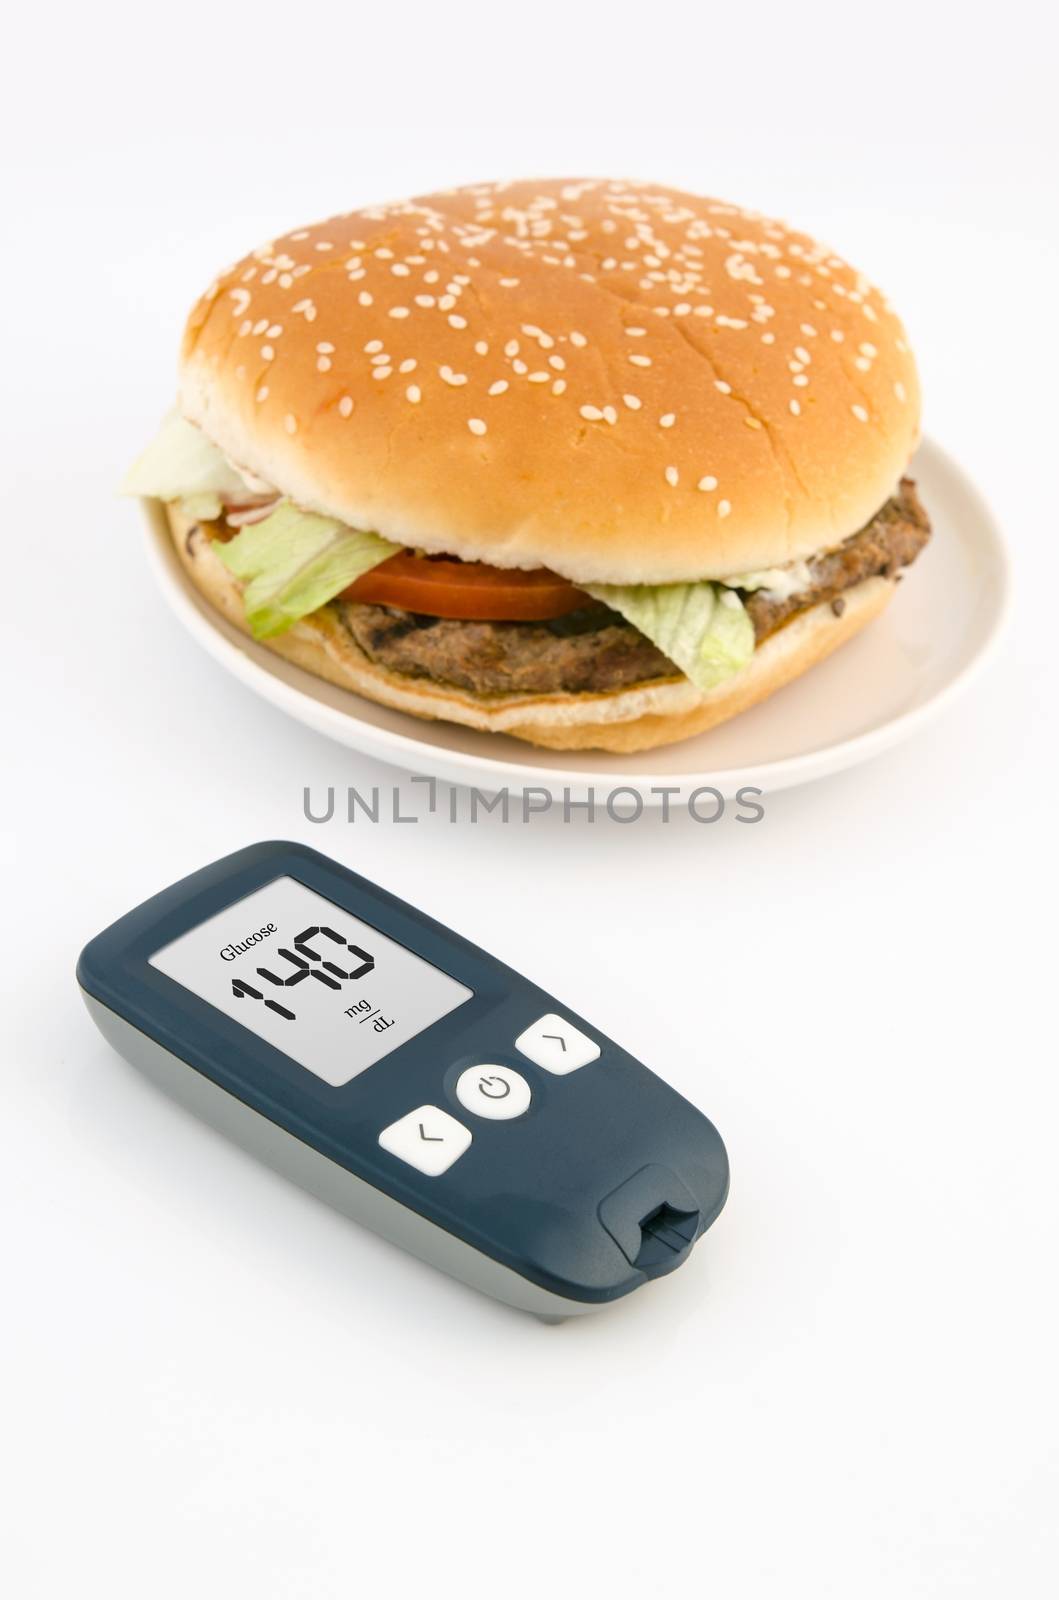 Glucometer and hamburger. Healthy lifestyle by simpson33